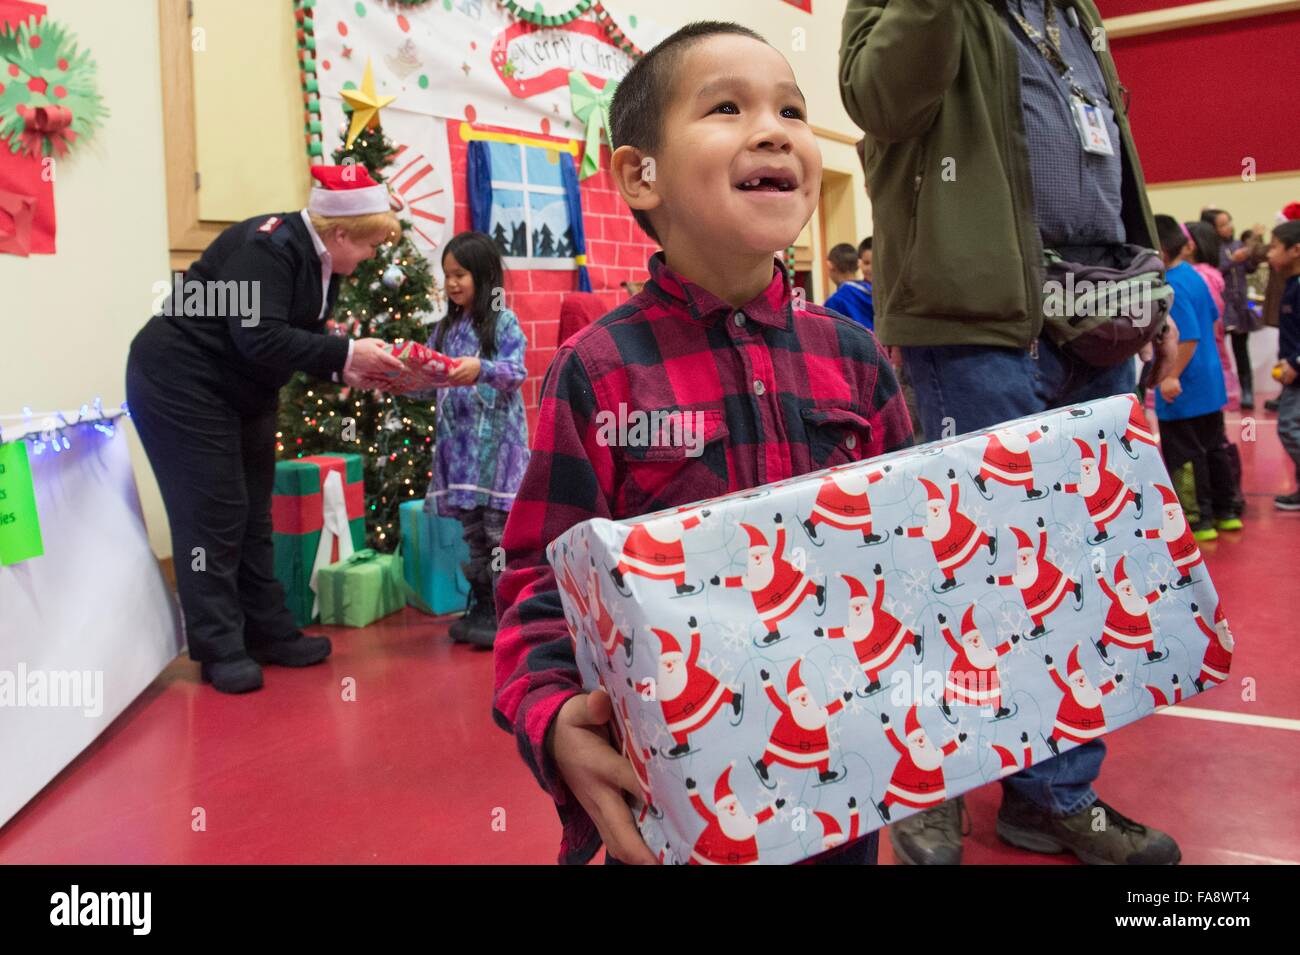 A young Native Alaskan boy smiles after receiving presents from volunteers during Operation Santa Claus December 5, 2015 in St. Mary's, Alaska. The program has been held for 59 years and brings Christmas cheer to underserved, remote villages across Alaska. Stock Photo